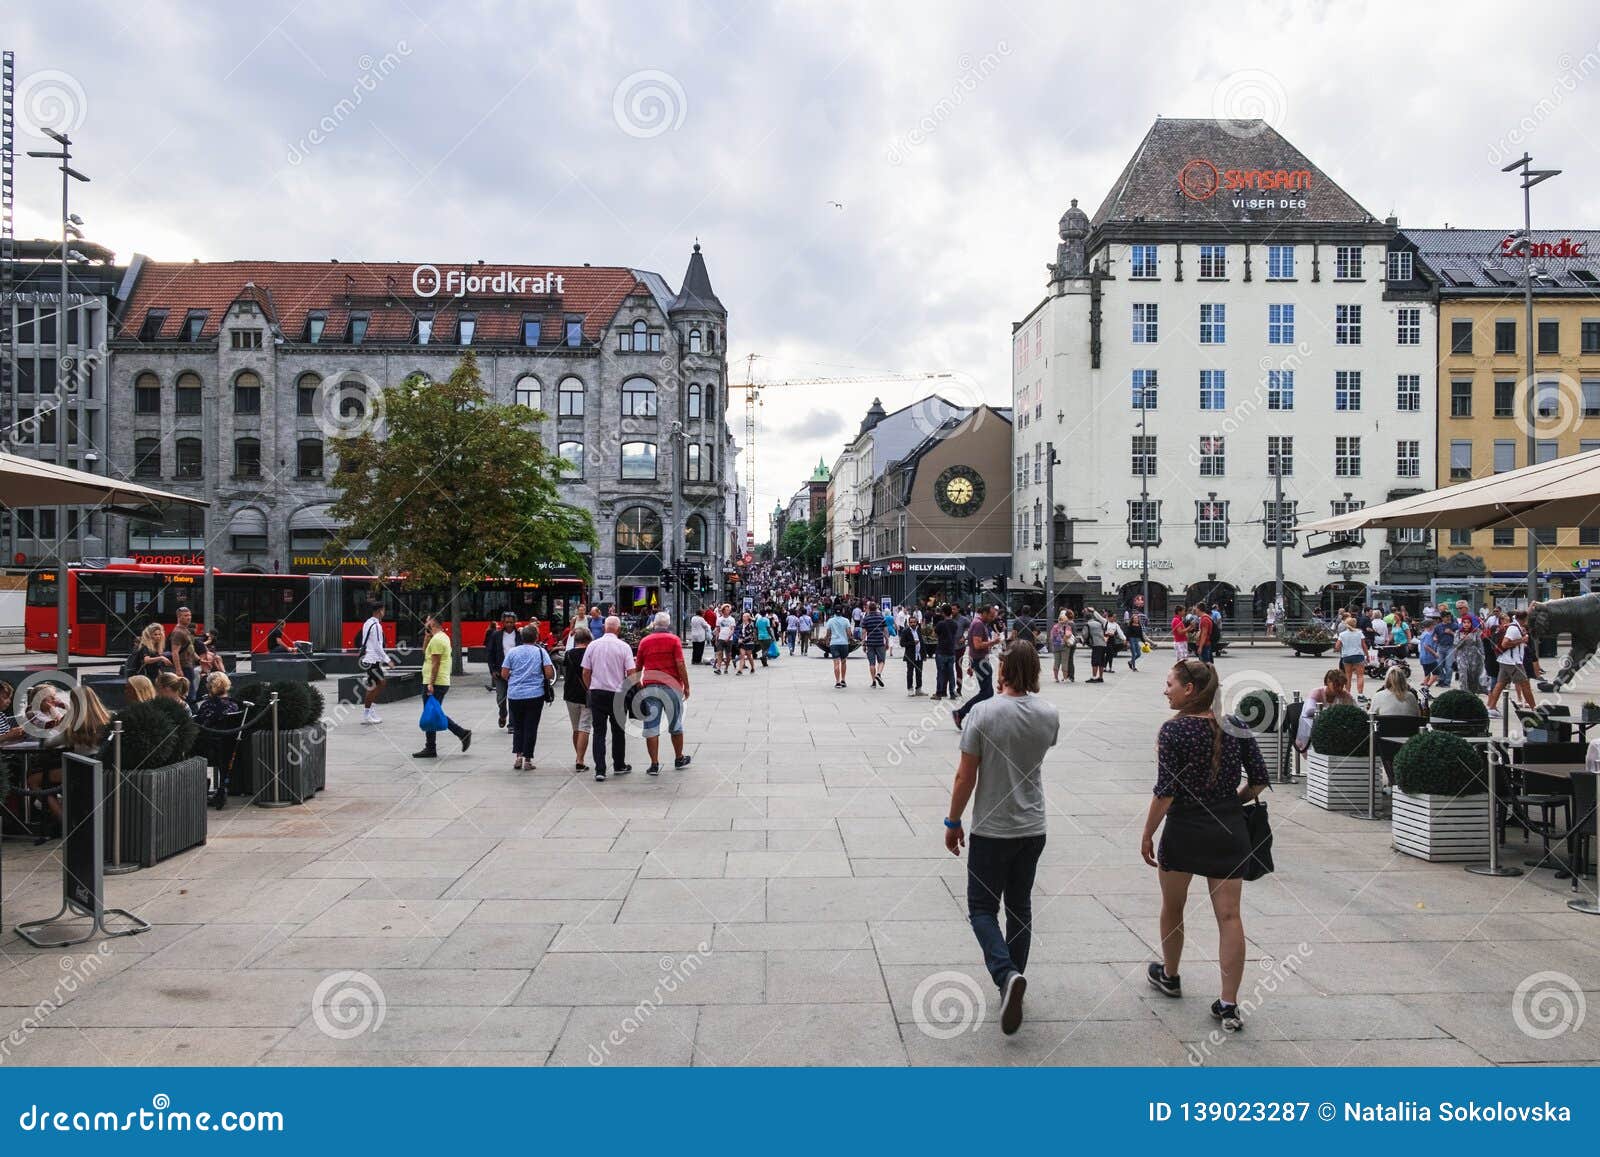 Jernbanetorget Square in Oslo, Norway Editorial Photography - Image of ...